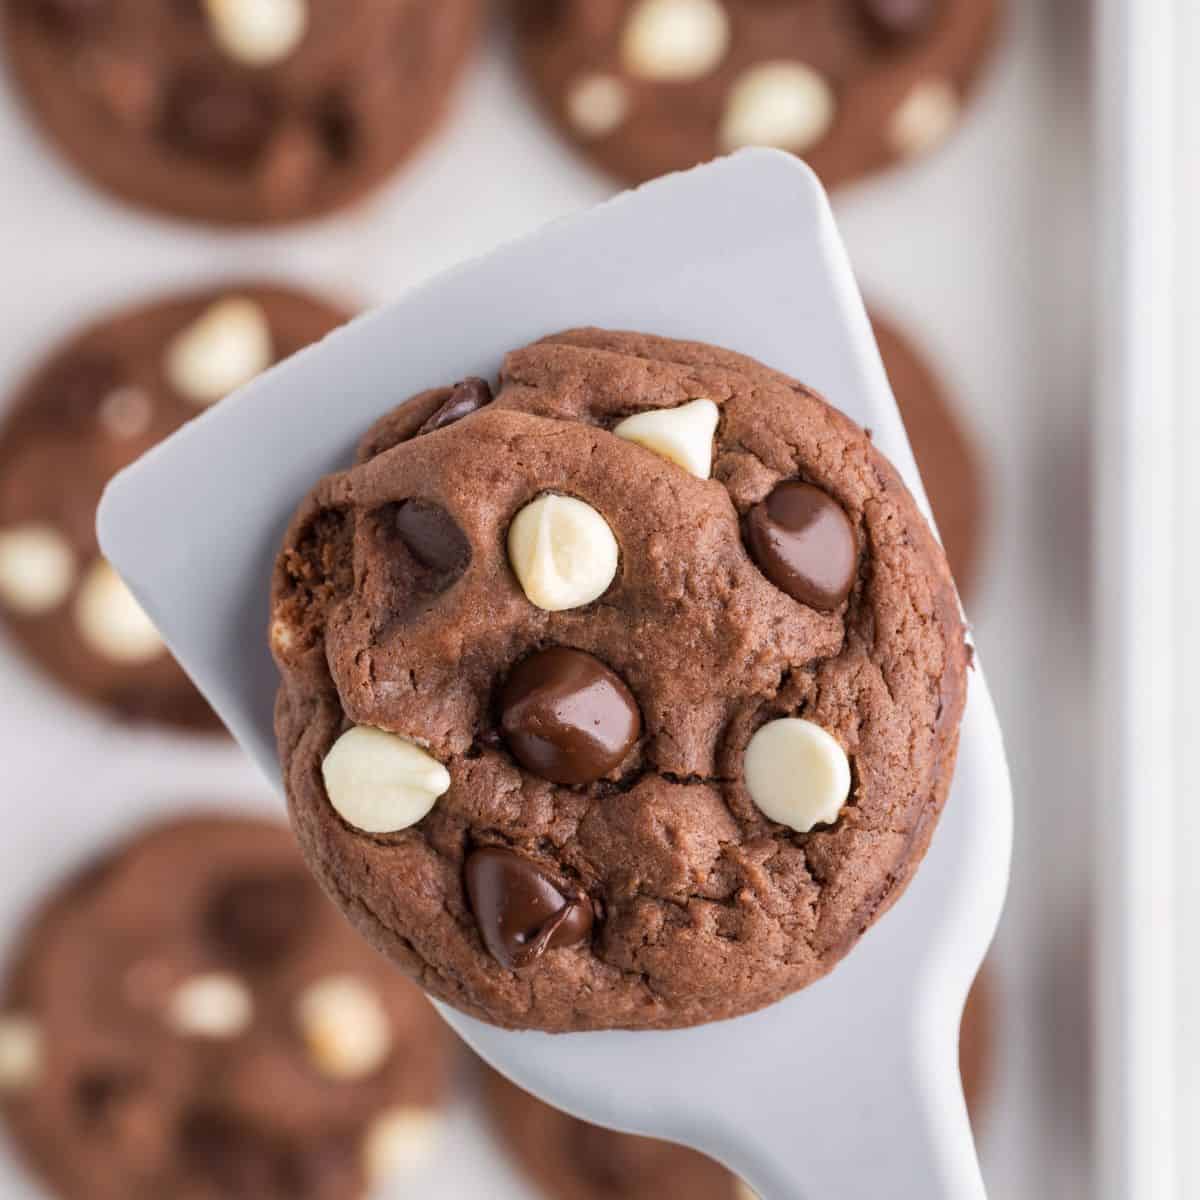 Sugar Free Triple Chocolate Cookies, delicious cake mix dessert or snack recipe featuring chocolate and white chocolate chips. No added sugar.